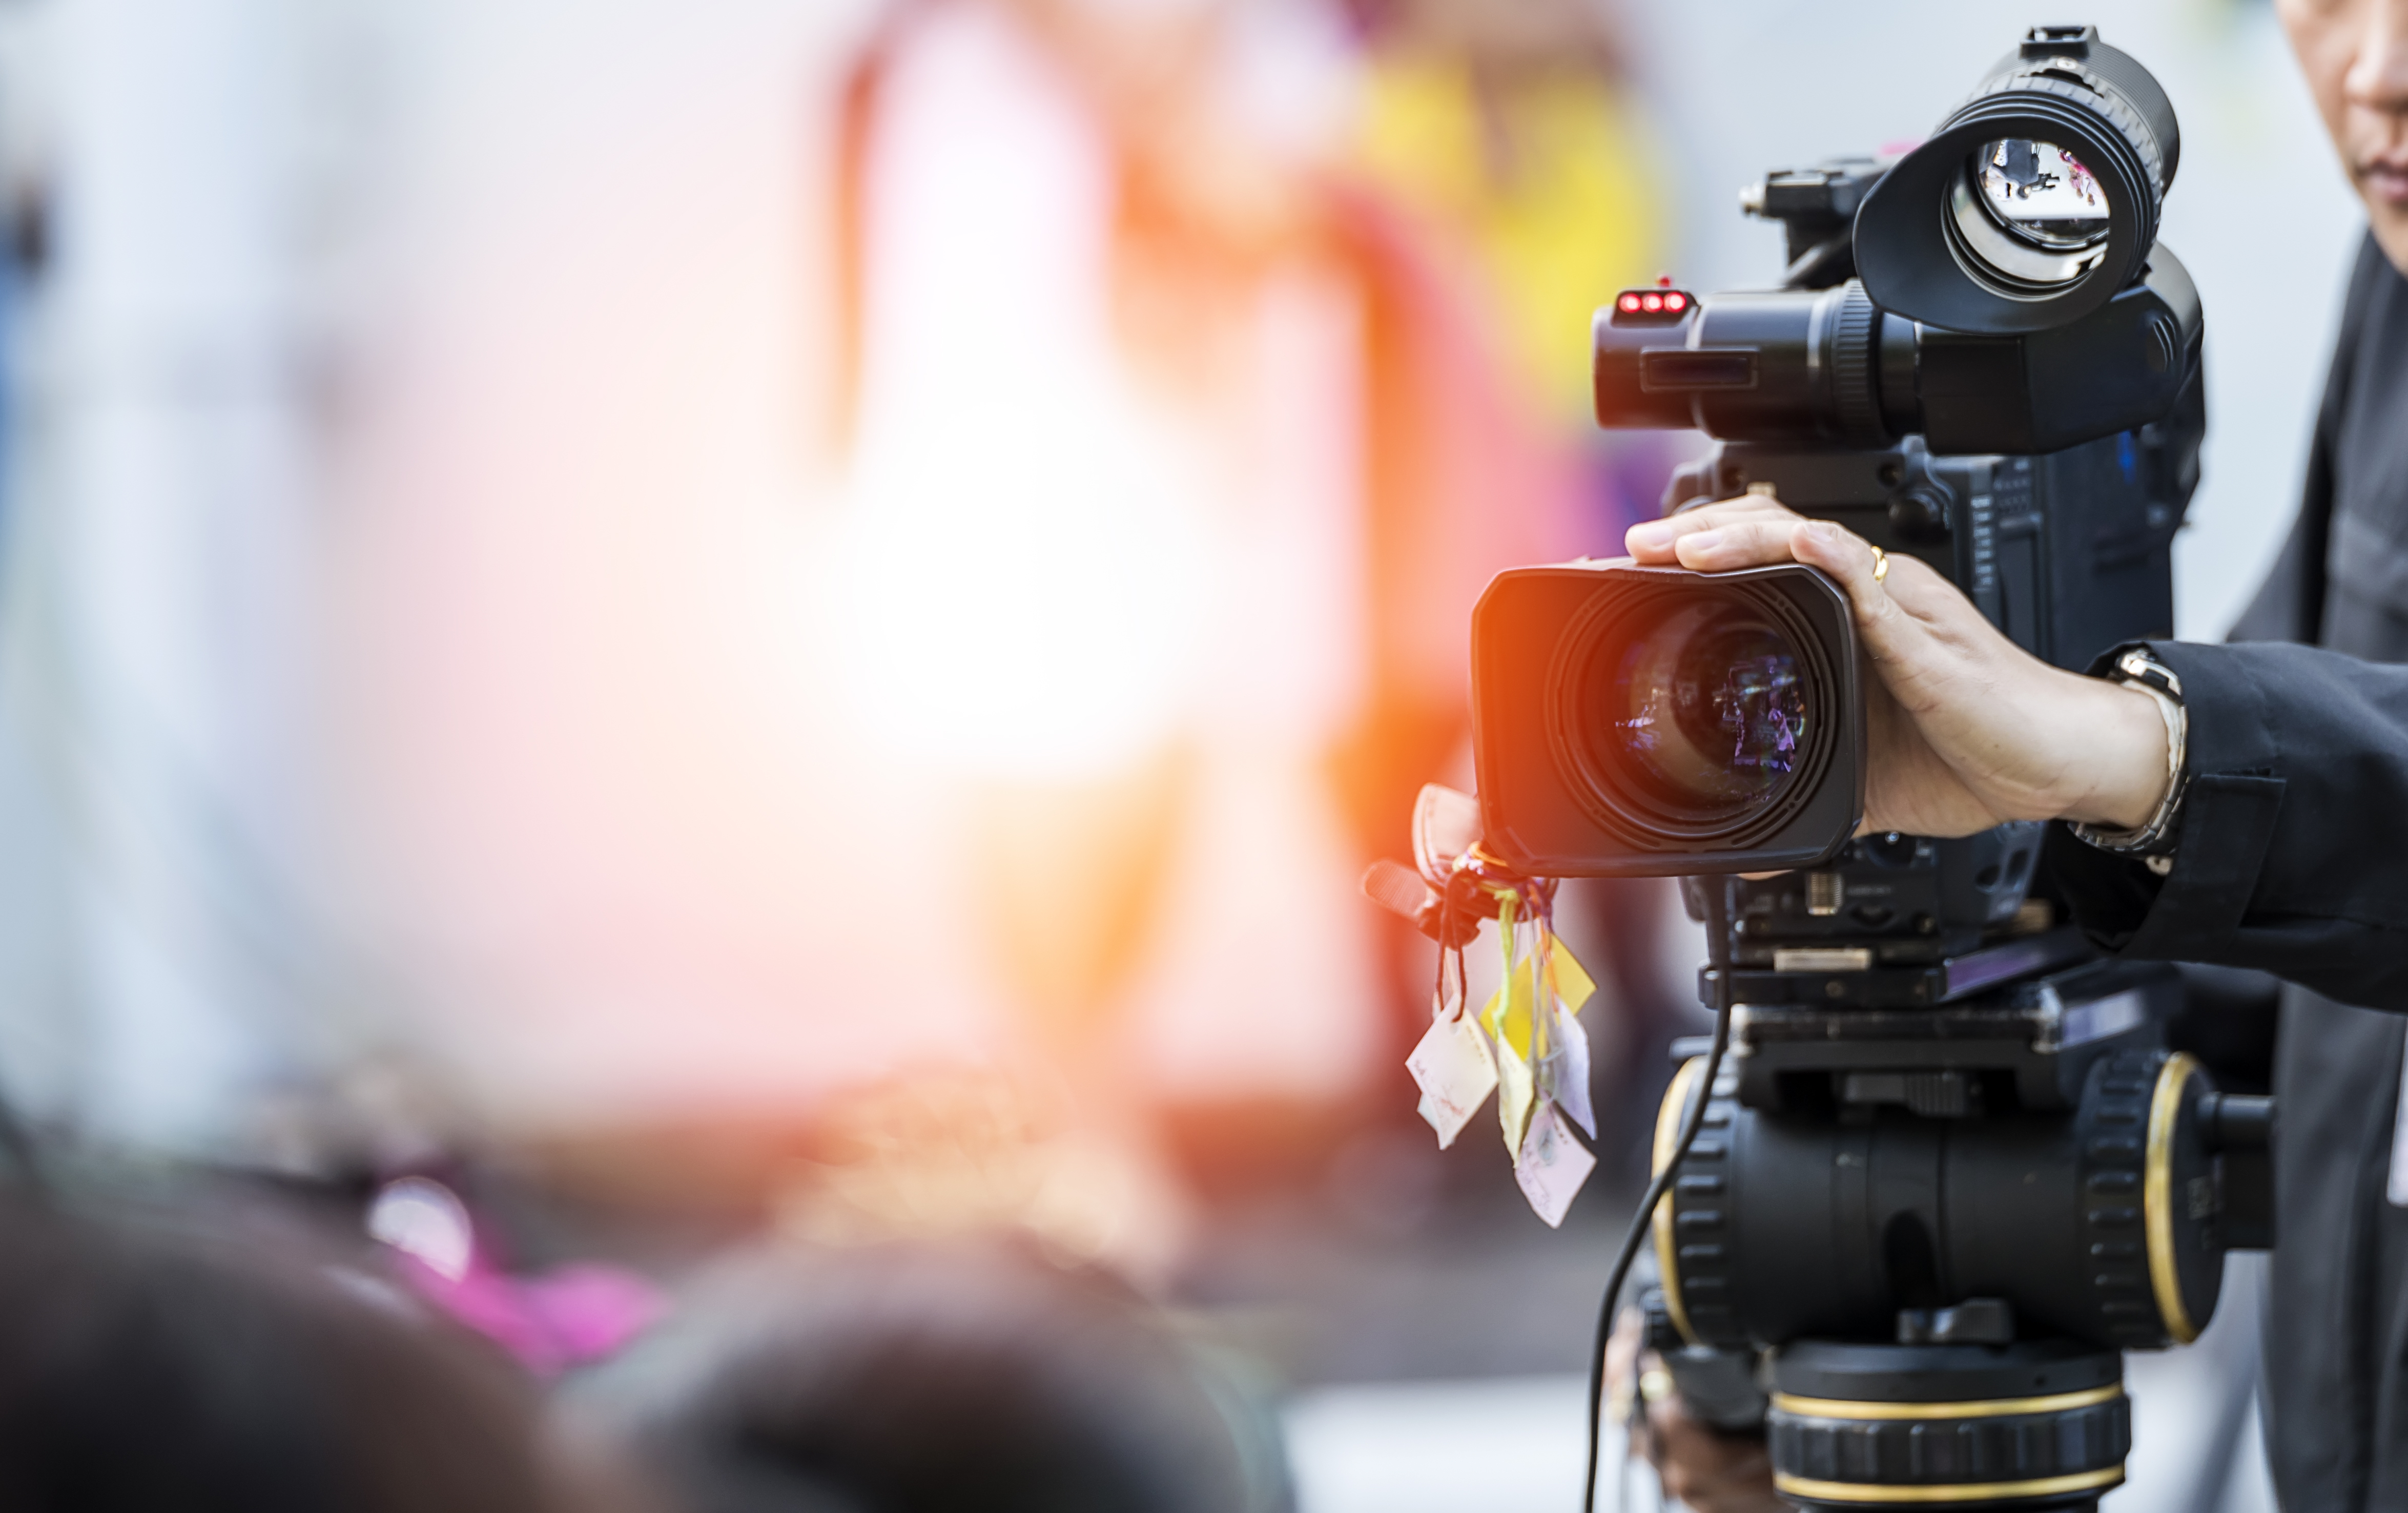 5 Day-Of Tips for Preparing a Video Shoot